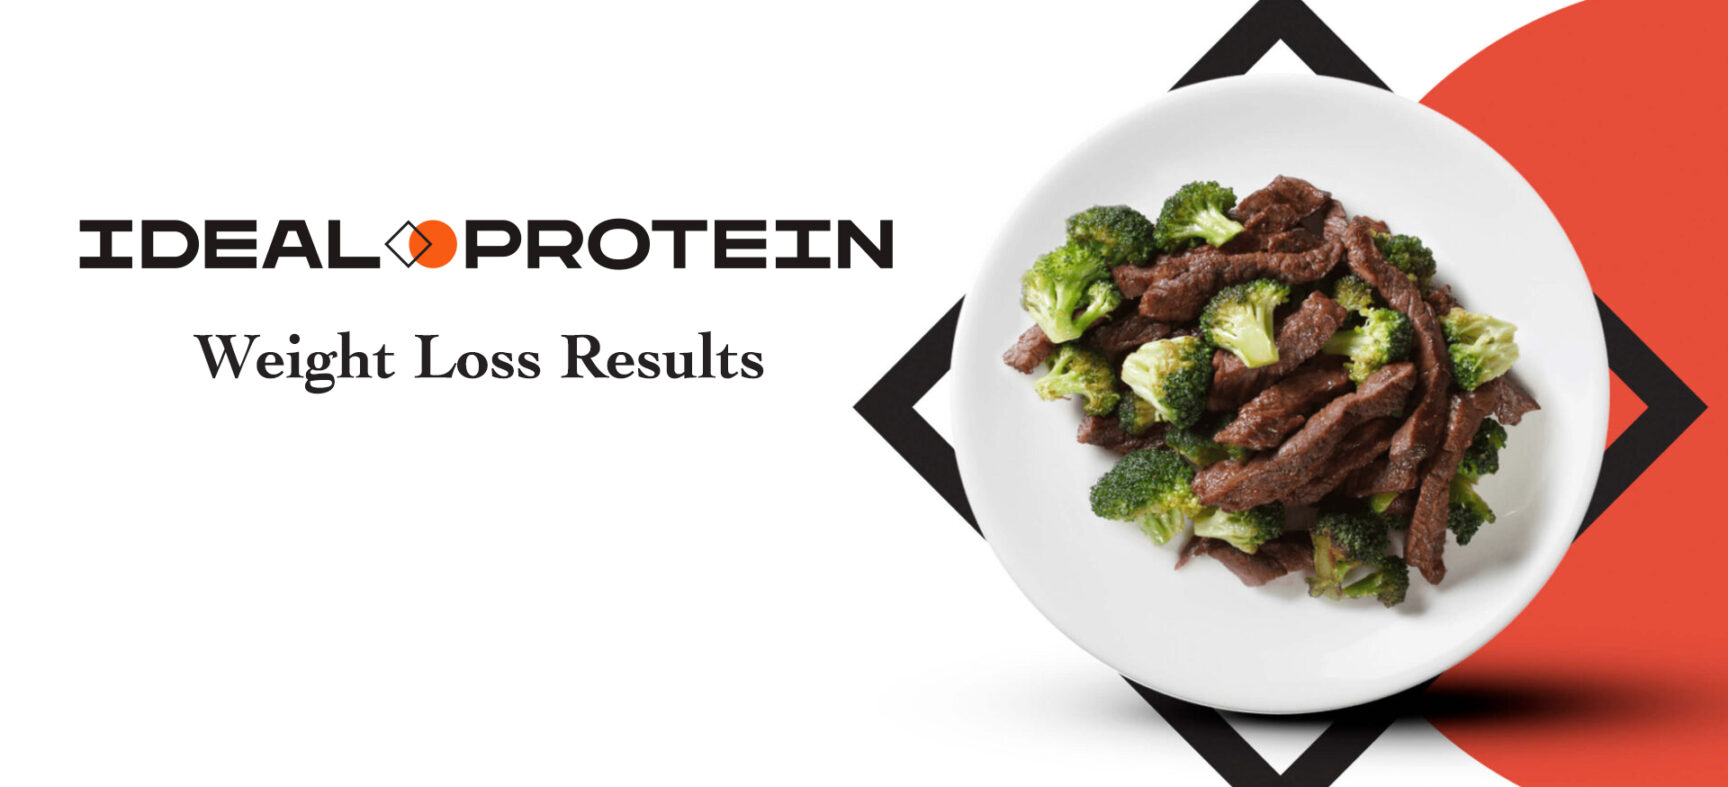 Ideal Protein Weight Loss Results